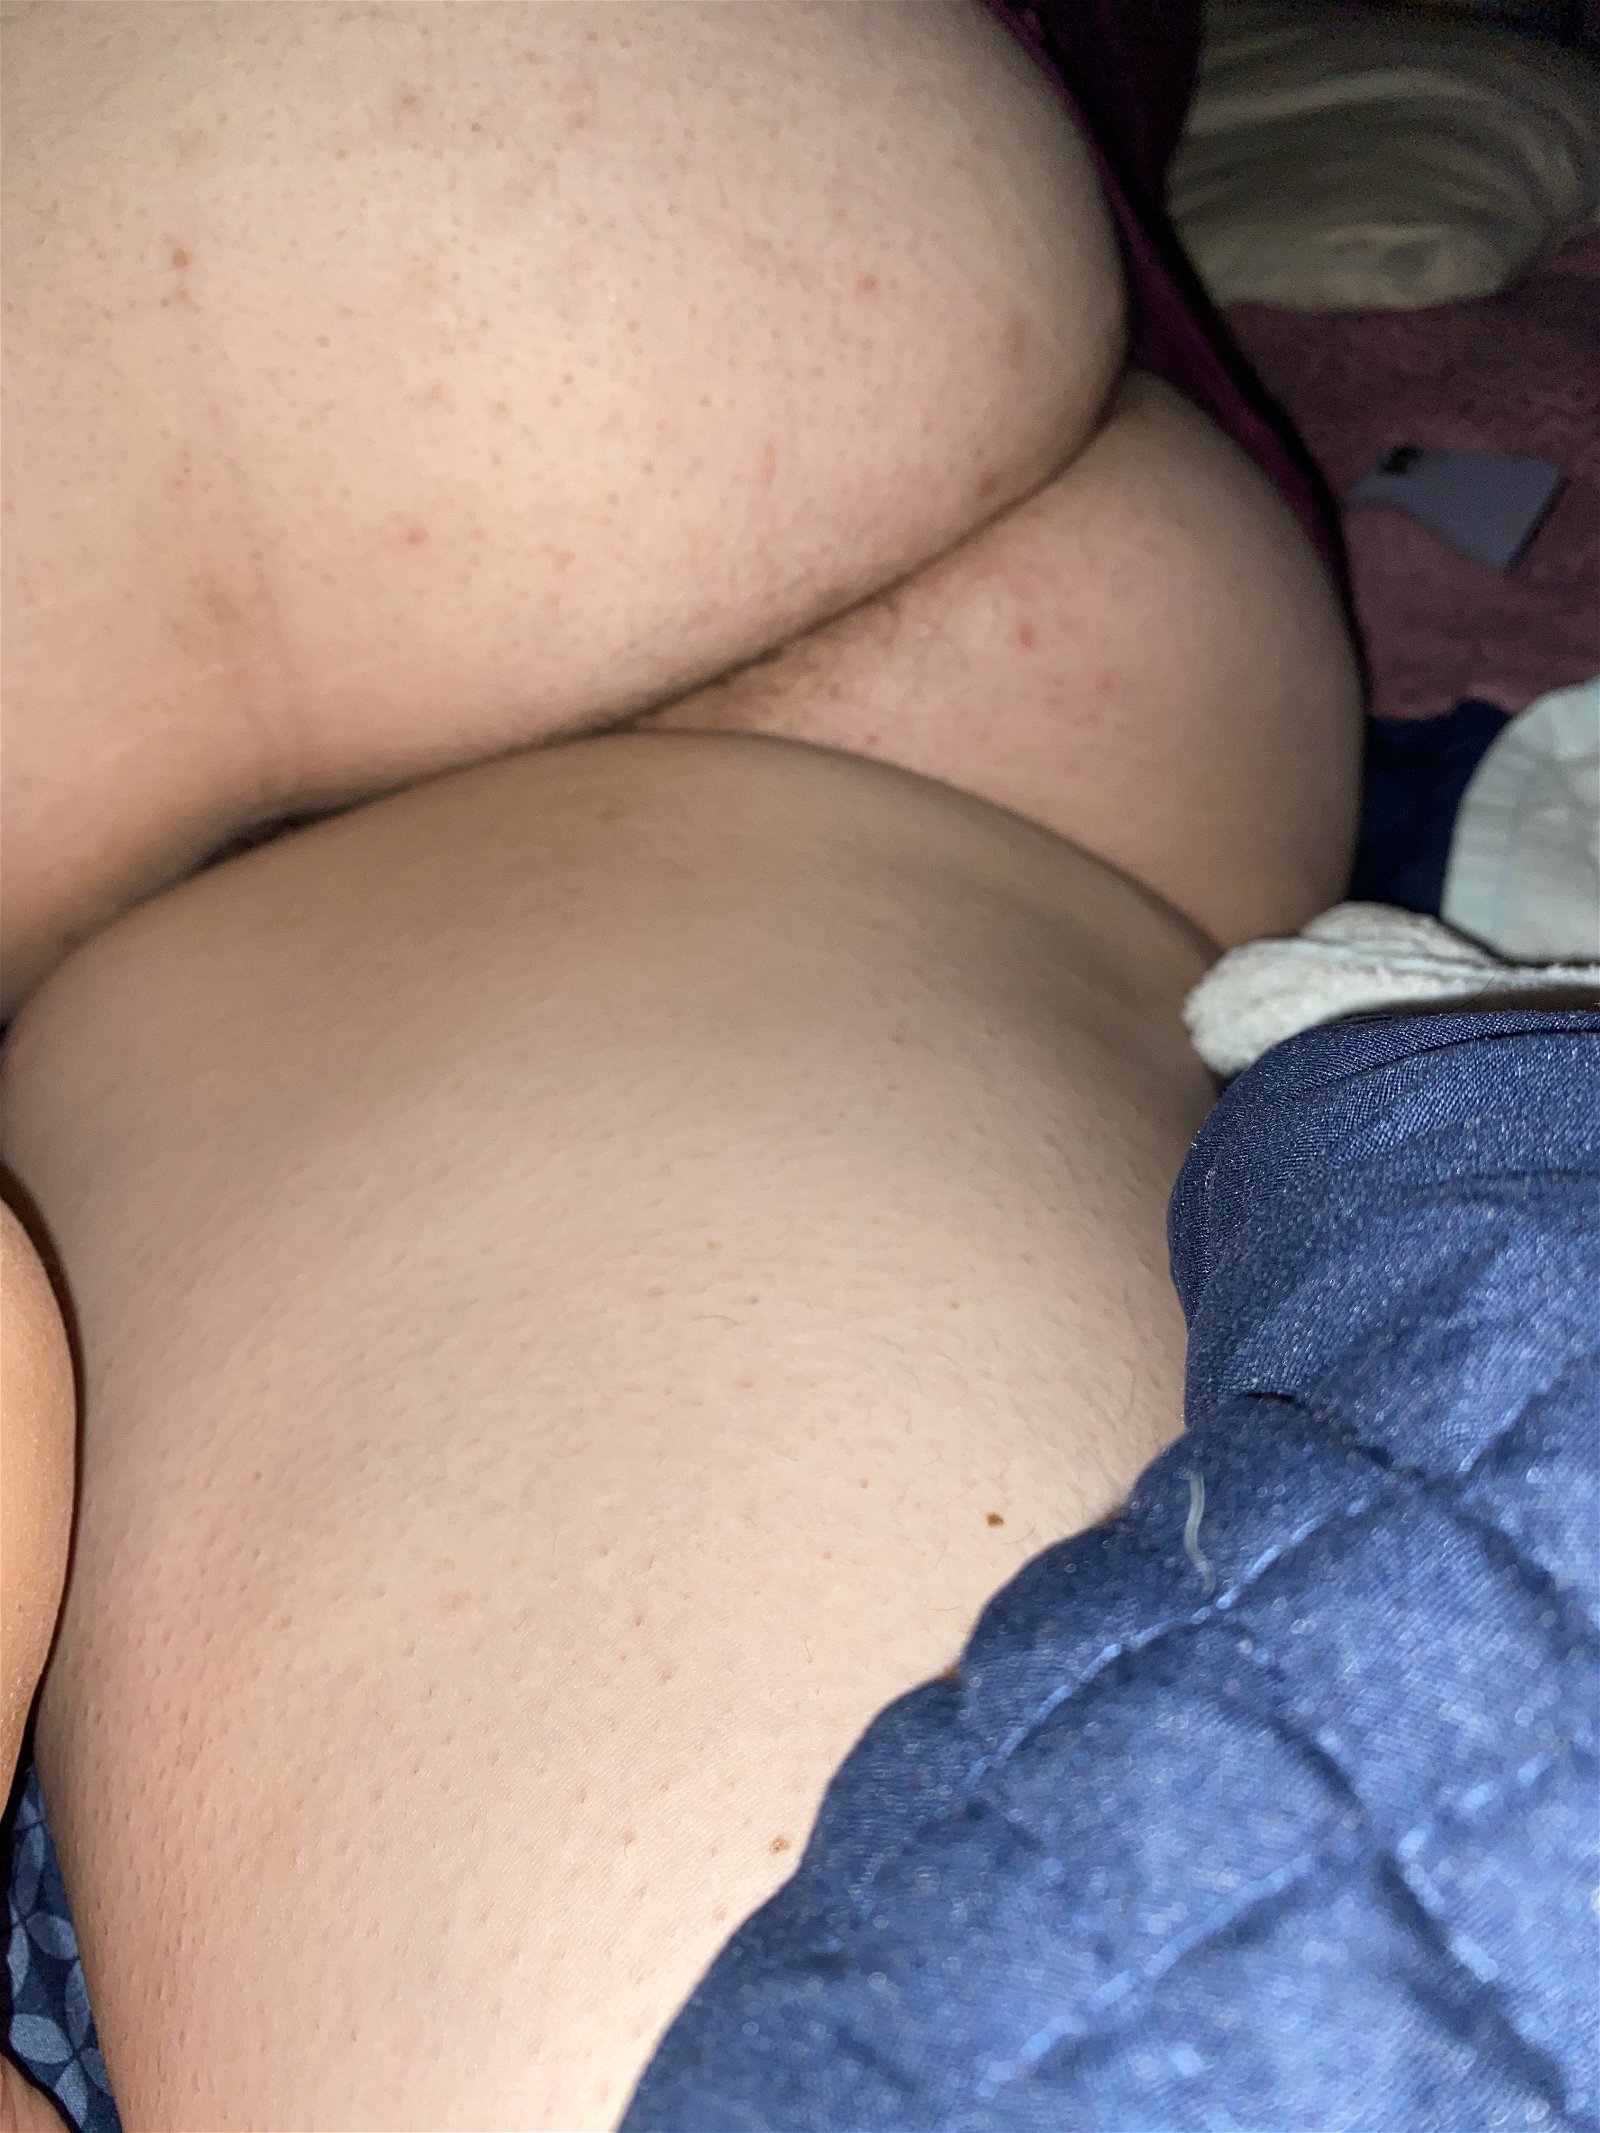 Photo by Bigdick2664 with the username @Bigdick2664,  May 17, 2022 at 2:59 AM. The post is about the topic BBW and Chubby and the text says 'My fat slut wife y'all enjoy that fat pussy'